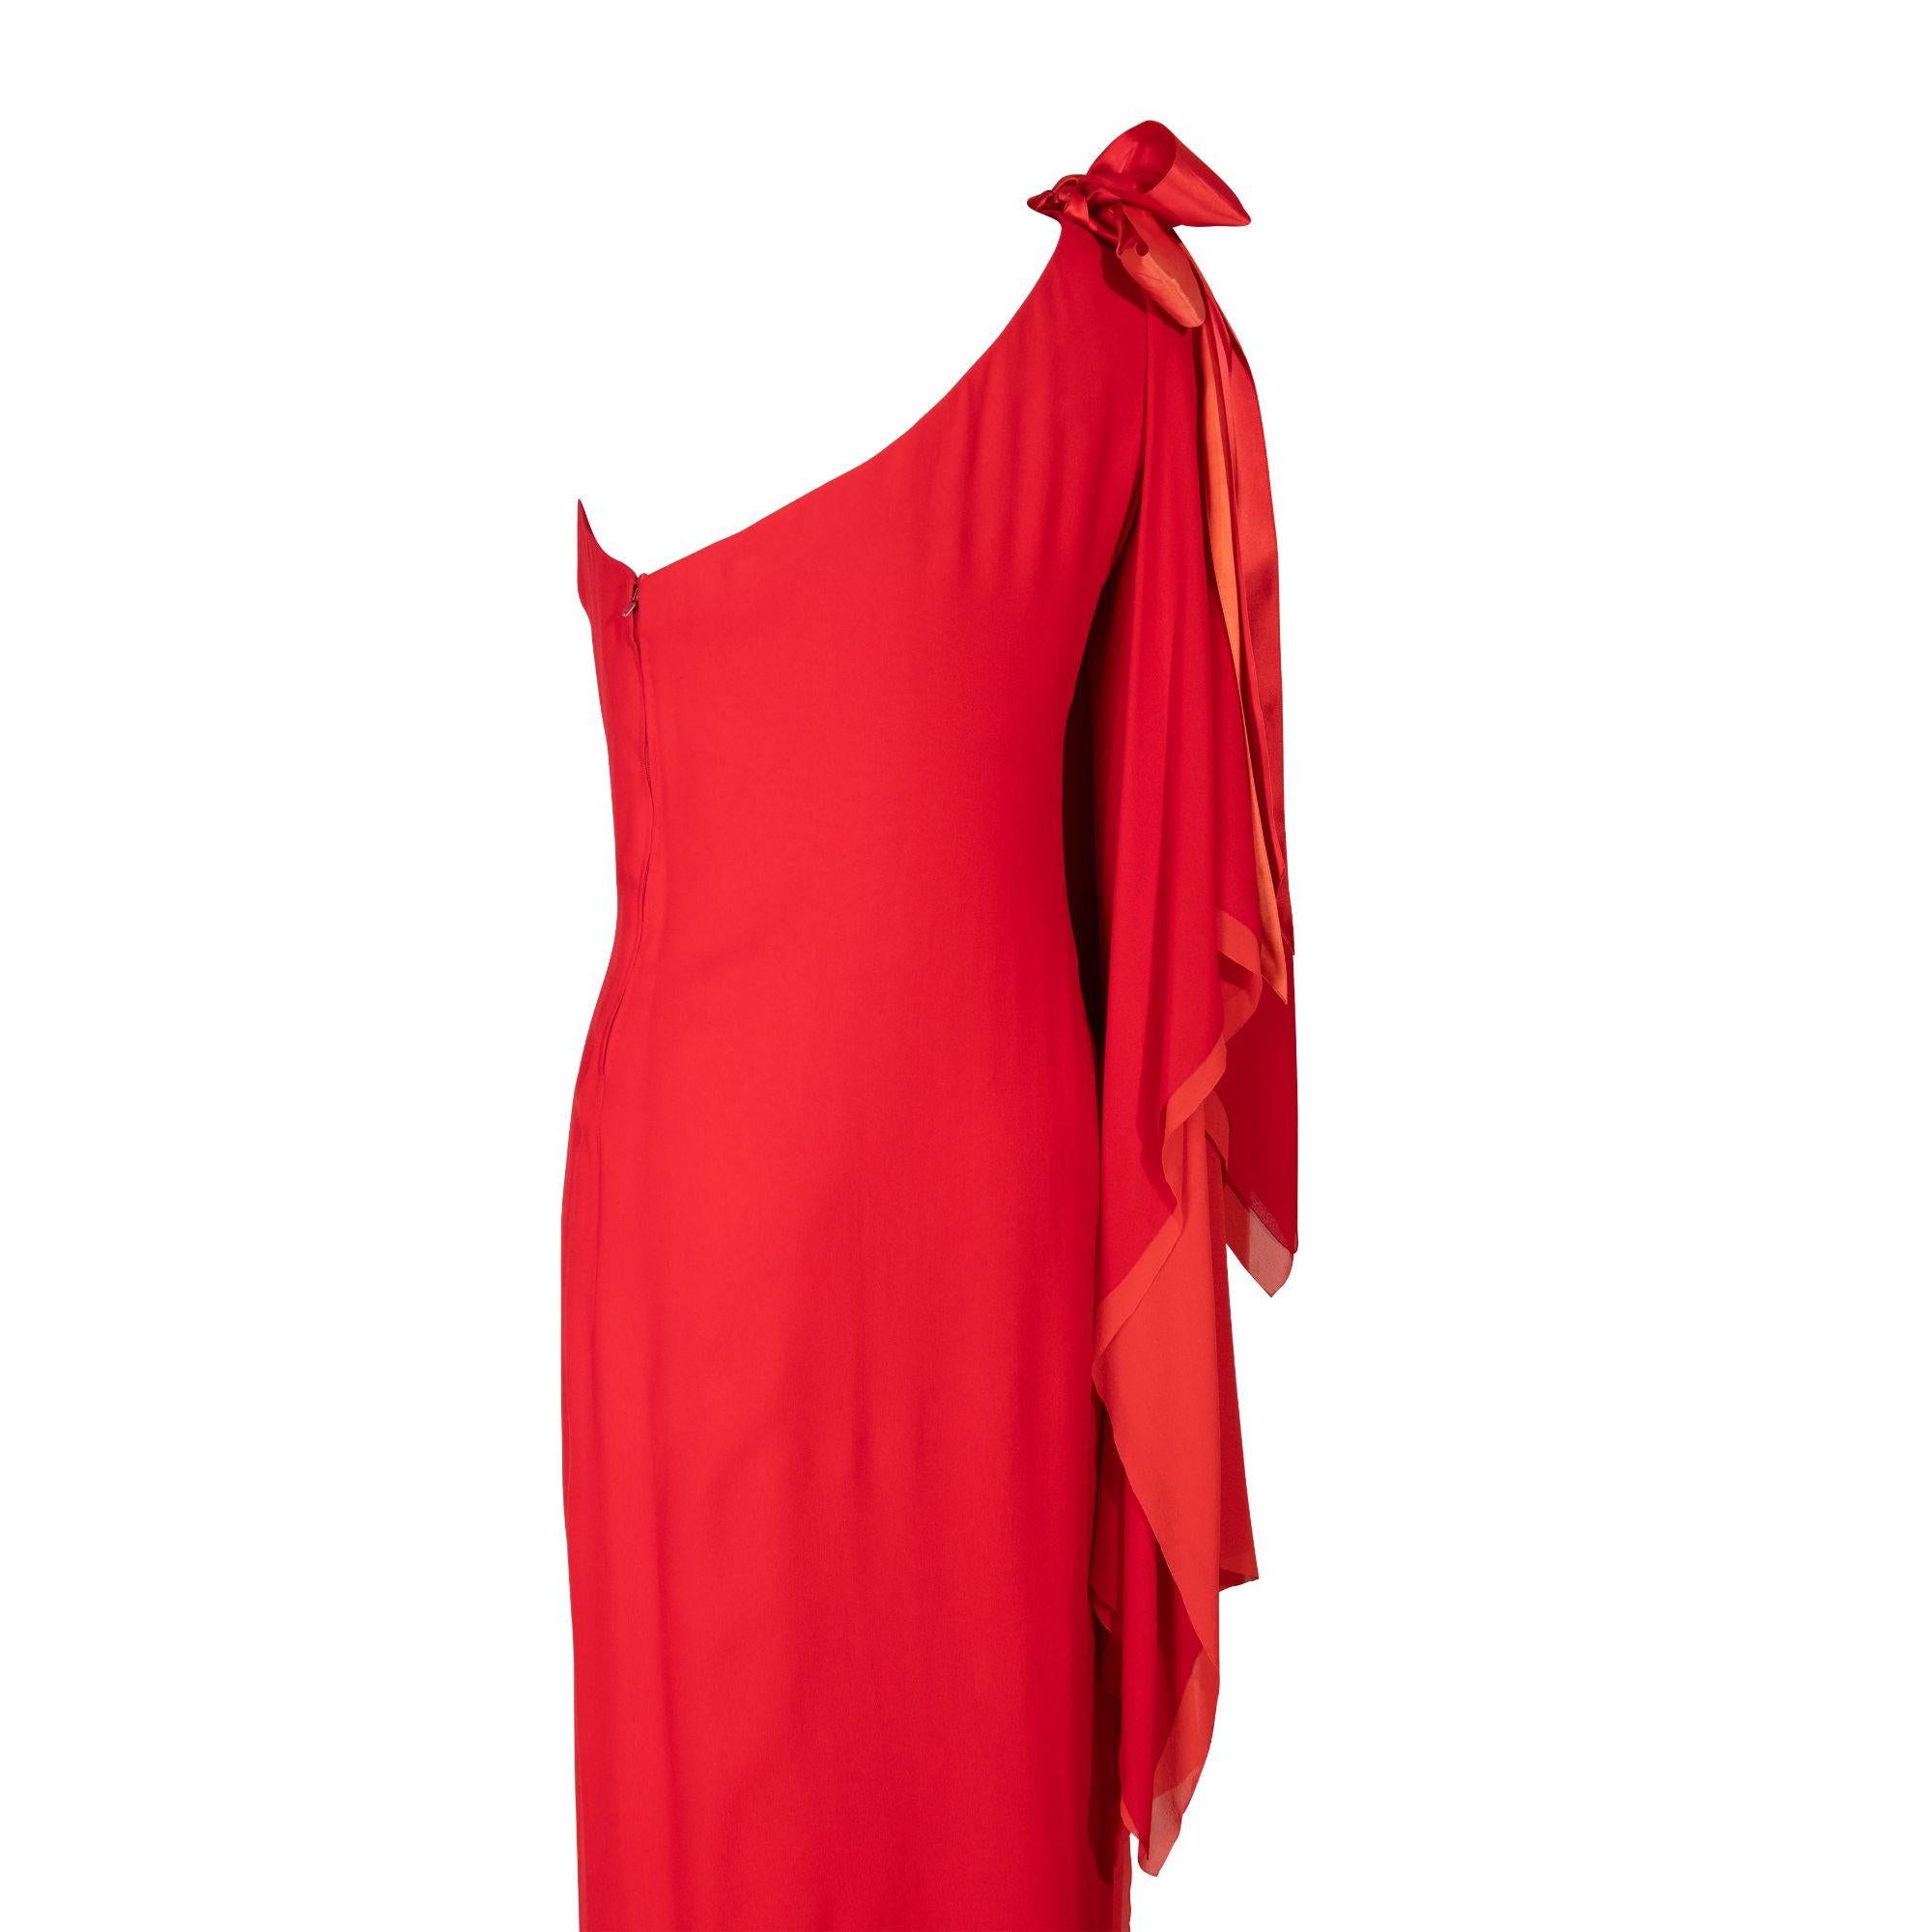 1979 Pierre Cardin Haute Couture Red and Orange Asymmetrical Silk Chiffon Gown 1